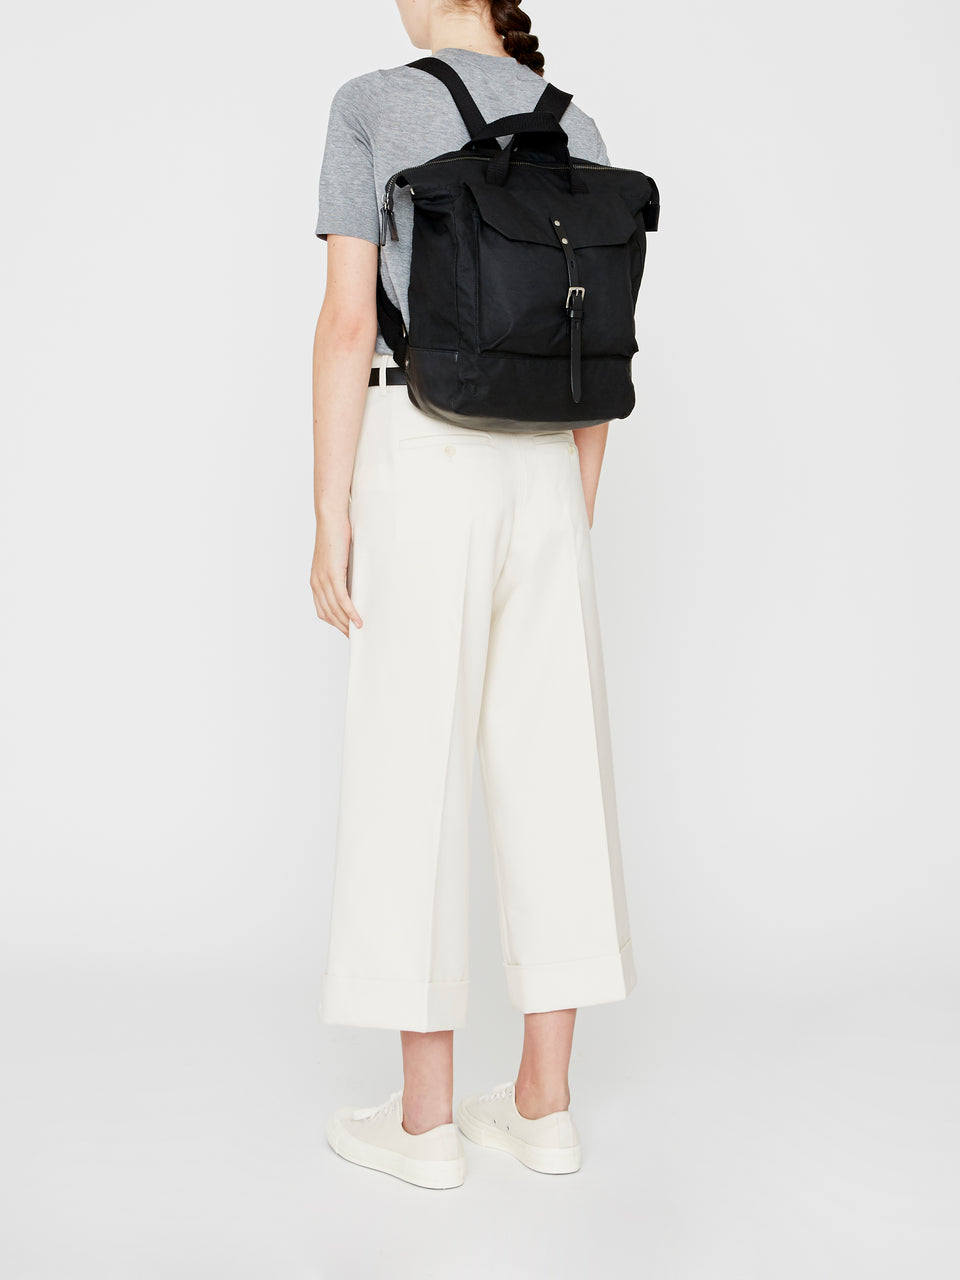 Frances Waxed Cotton Rucksack in Black – Ally Capellino